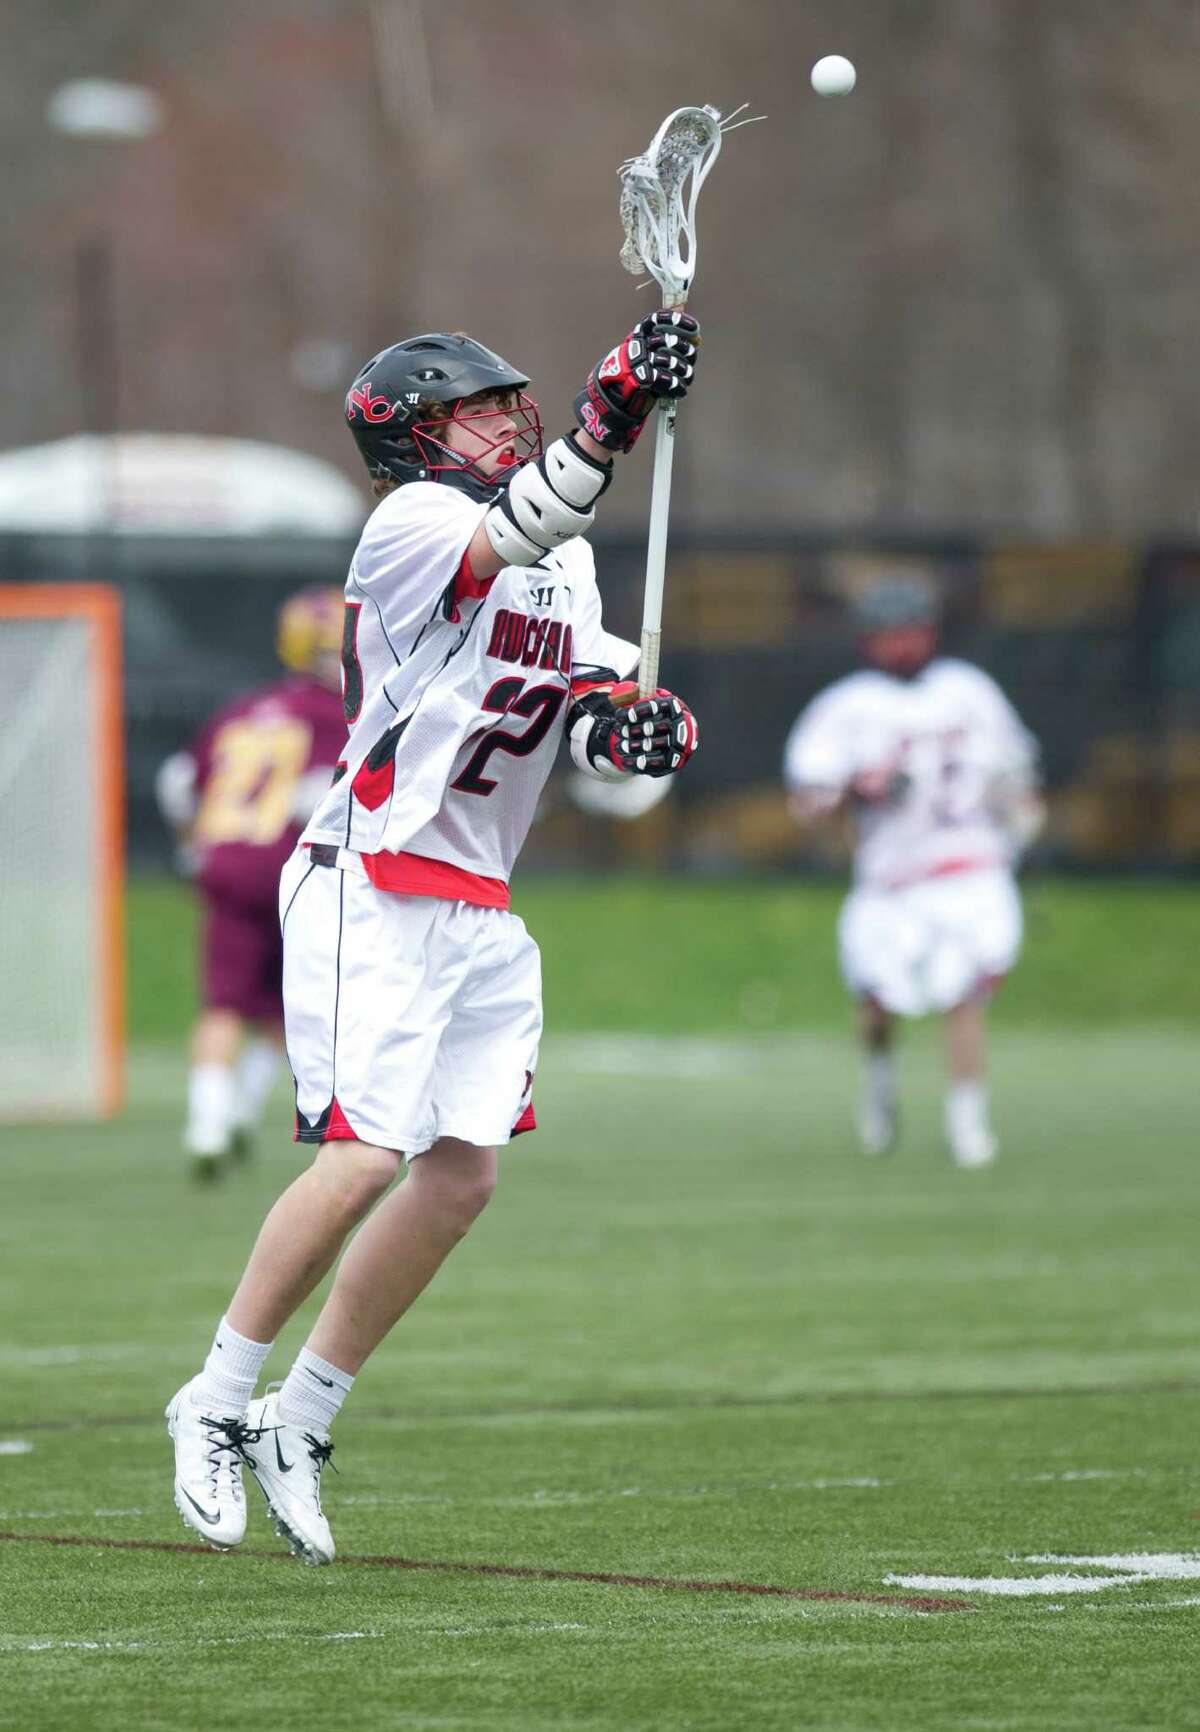 New Canaan's Graham Wagner catches a pass during Saturday's boys lacrosse game against St. Joseph at New Canaan High School on April 13, 2013.